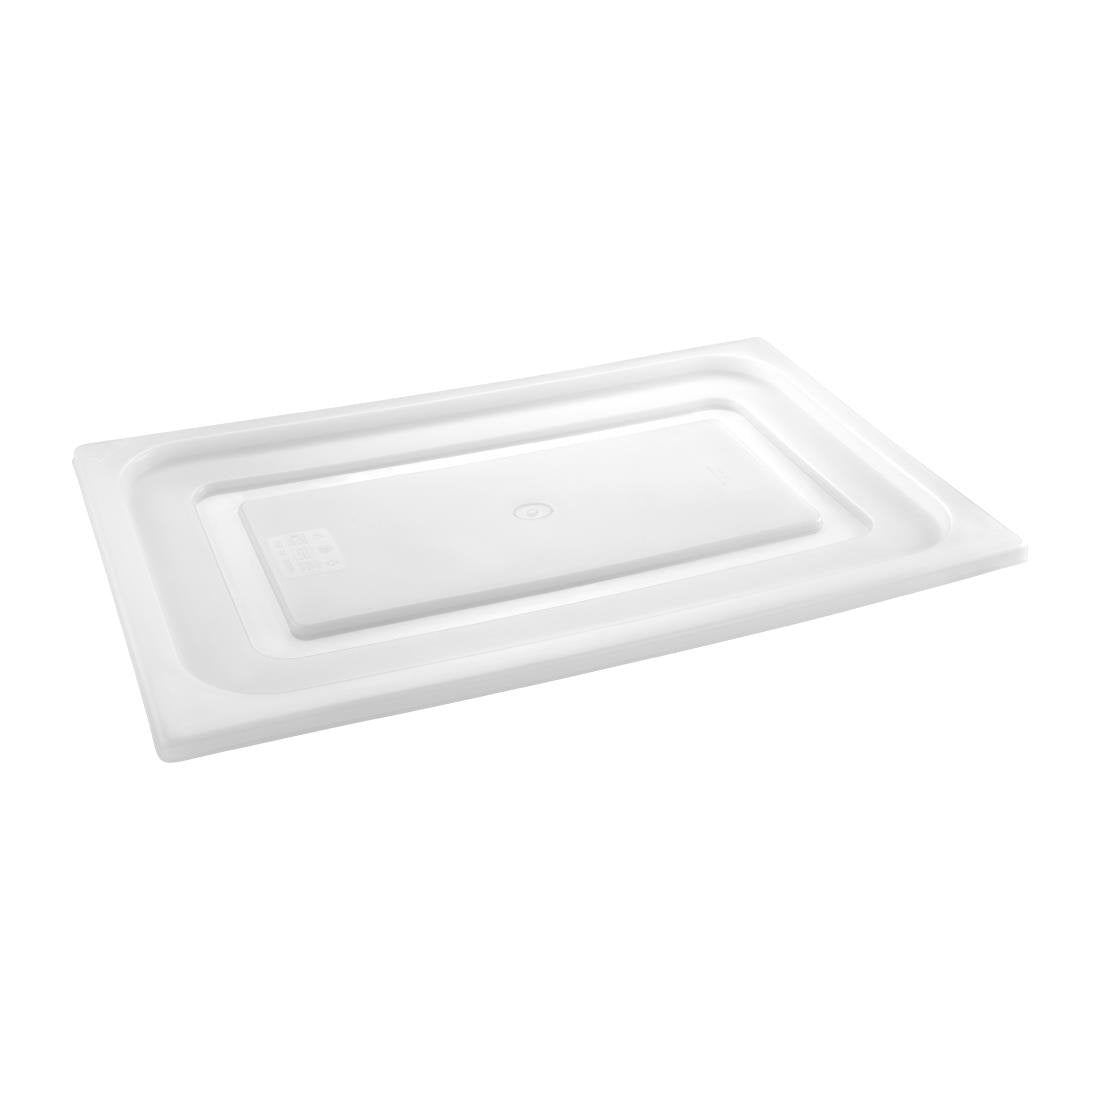 HT883 Pujadas Clear Polinorm Gastronorm Lid 1/9GN